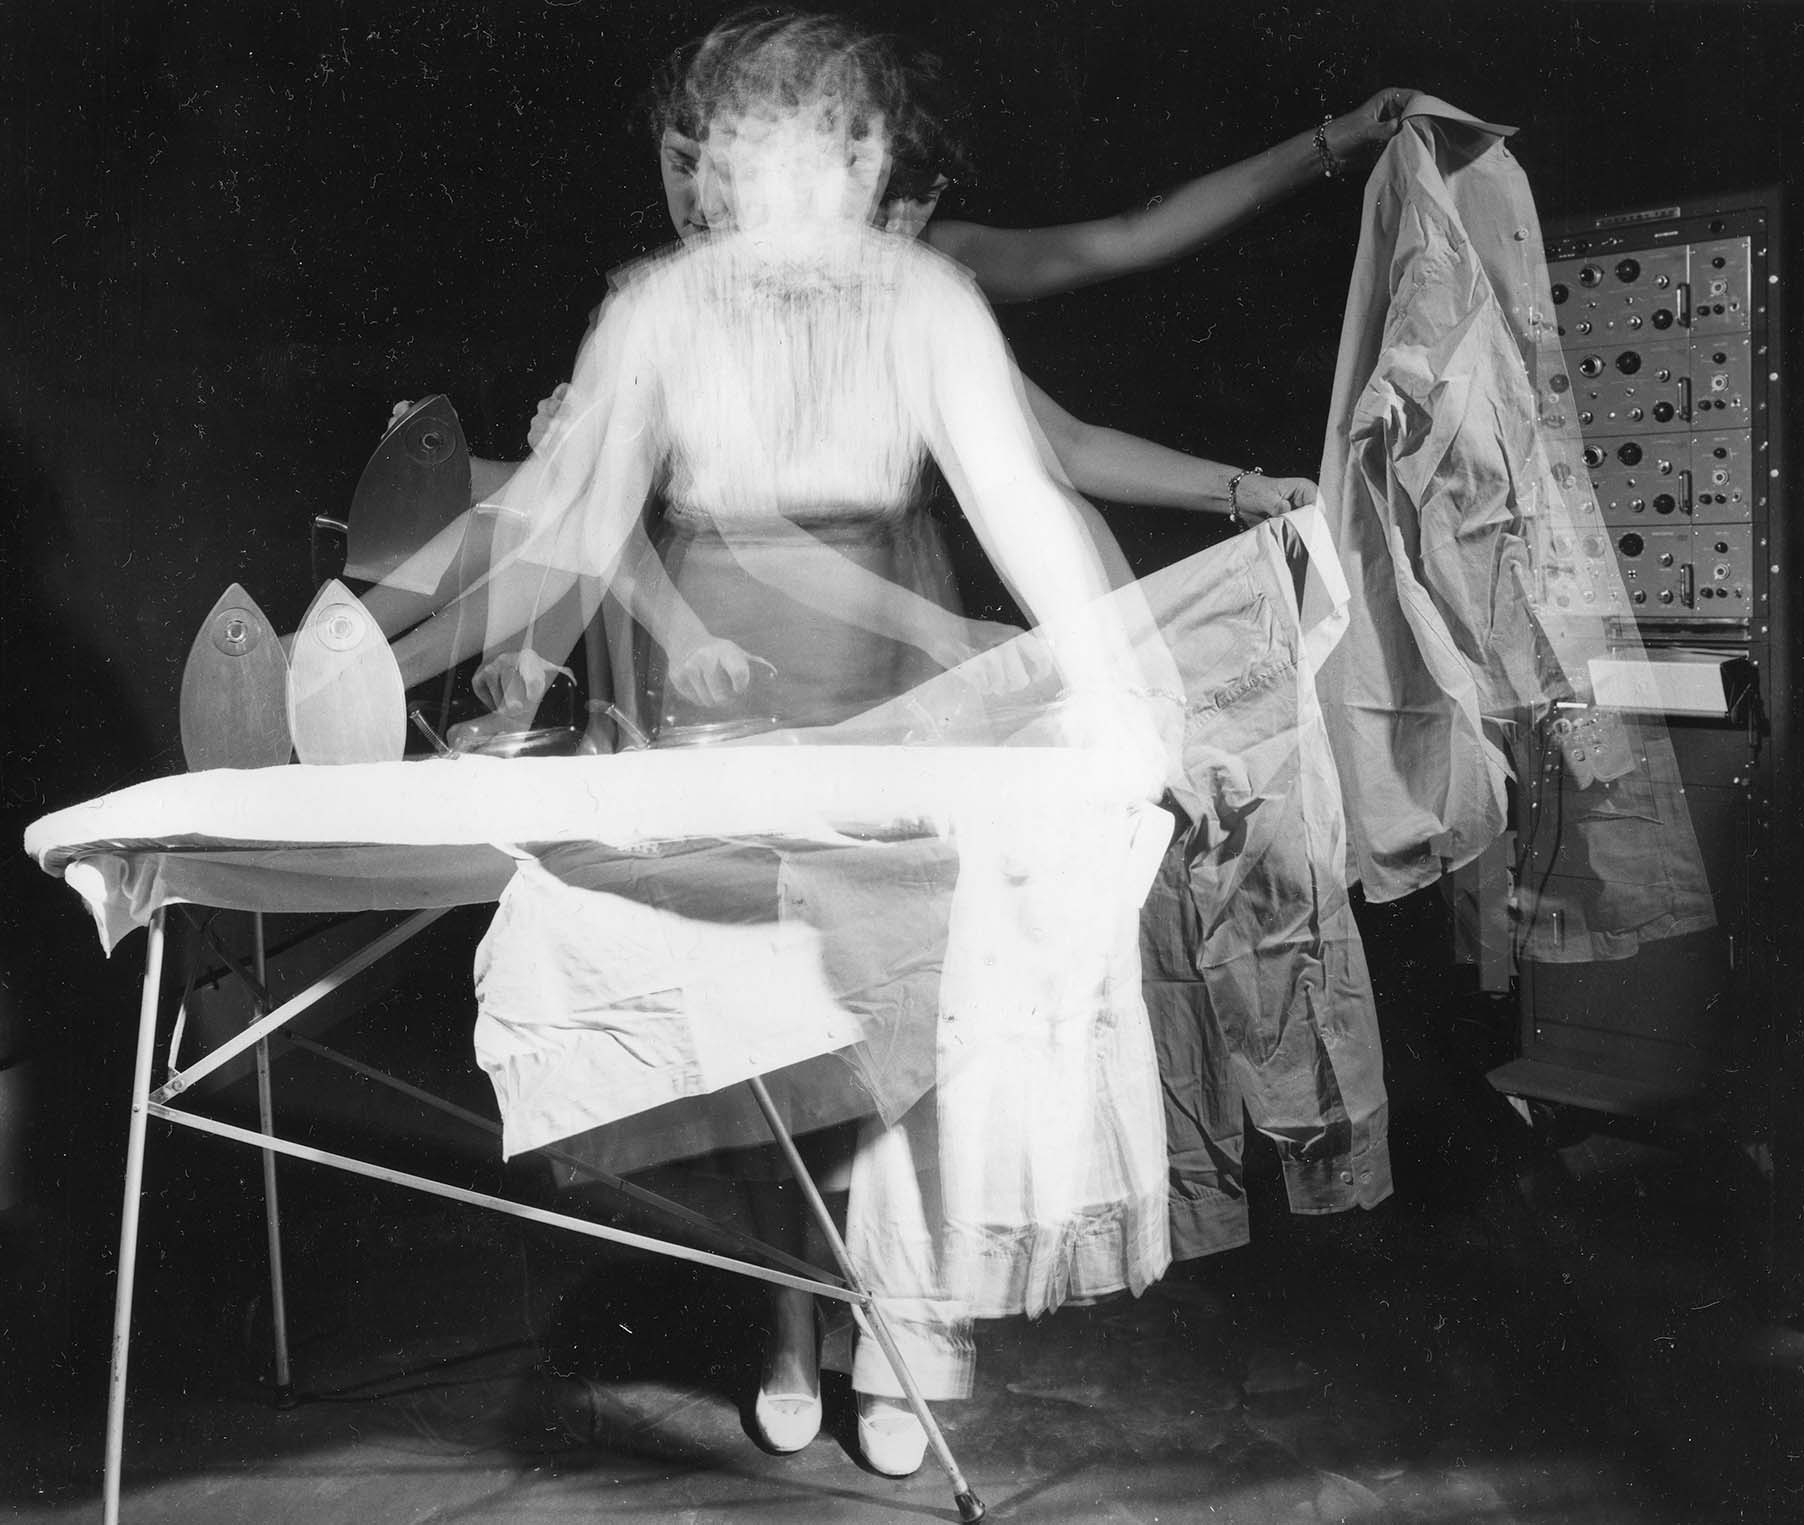 Woman ironing clothes on an ironing board. Image has a long exposure showing movement of the ironing